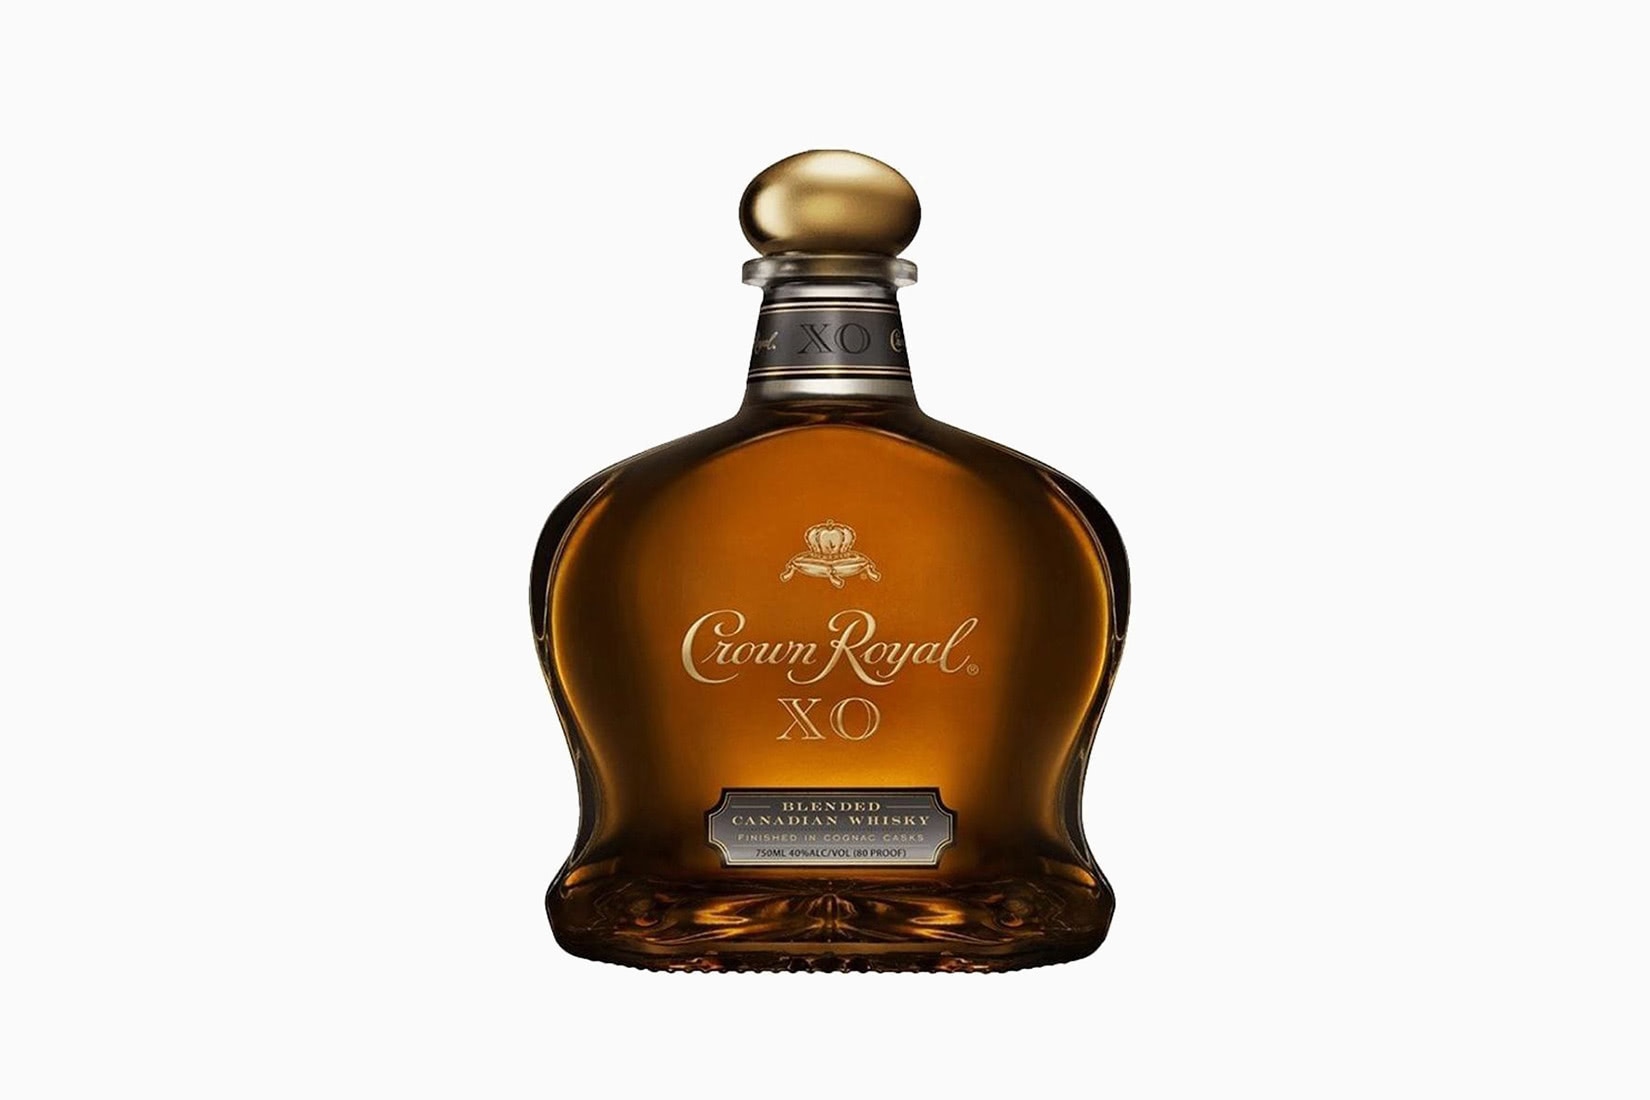 crown royal whisky bottle price size xo - Luxe Digital